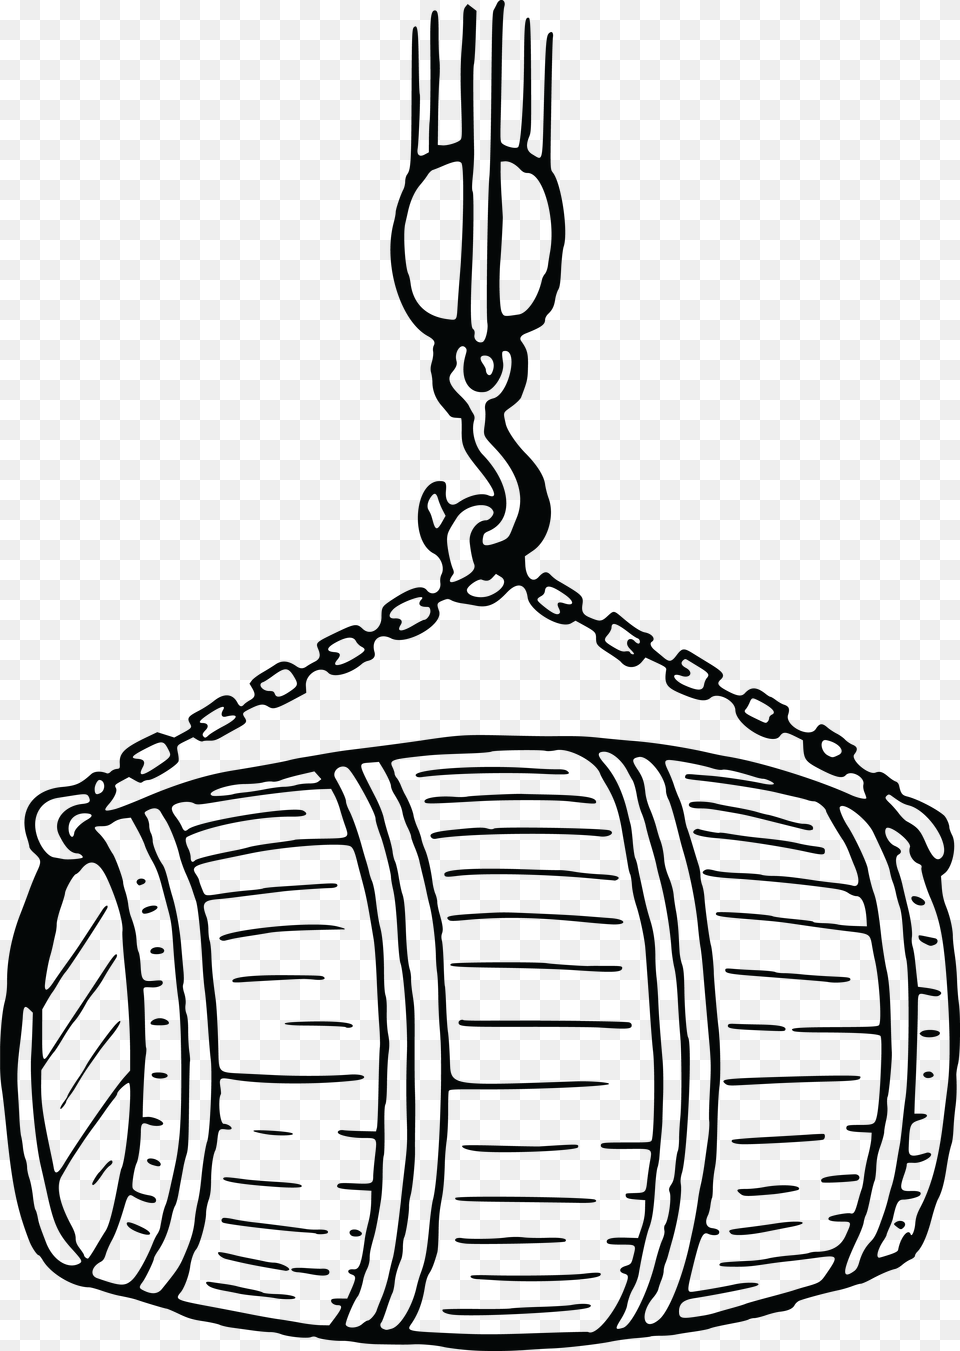 Clipart Of A Wooden Barrel In A Sling Black And White, Car, Transportation, Vehicle Free Png Download